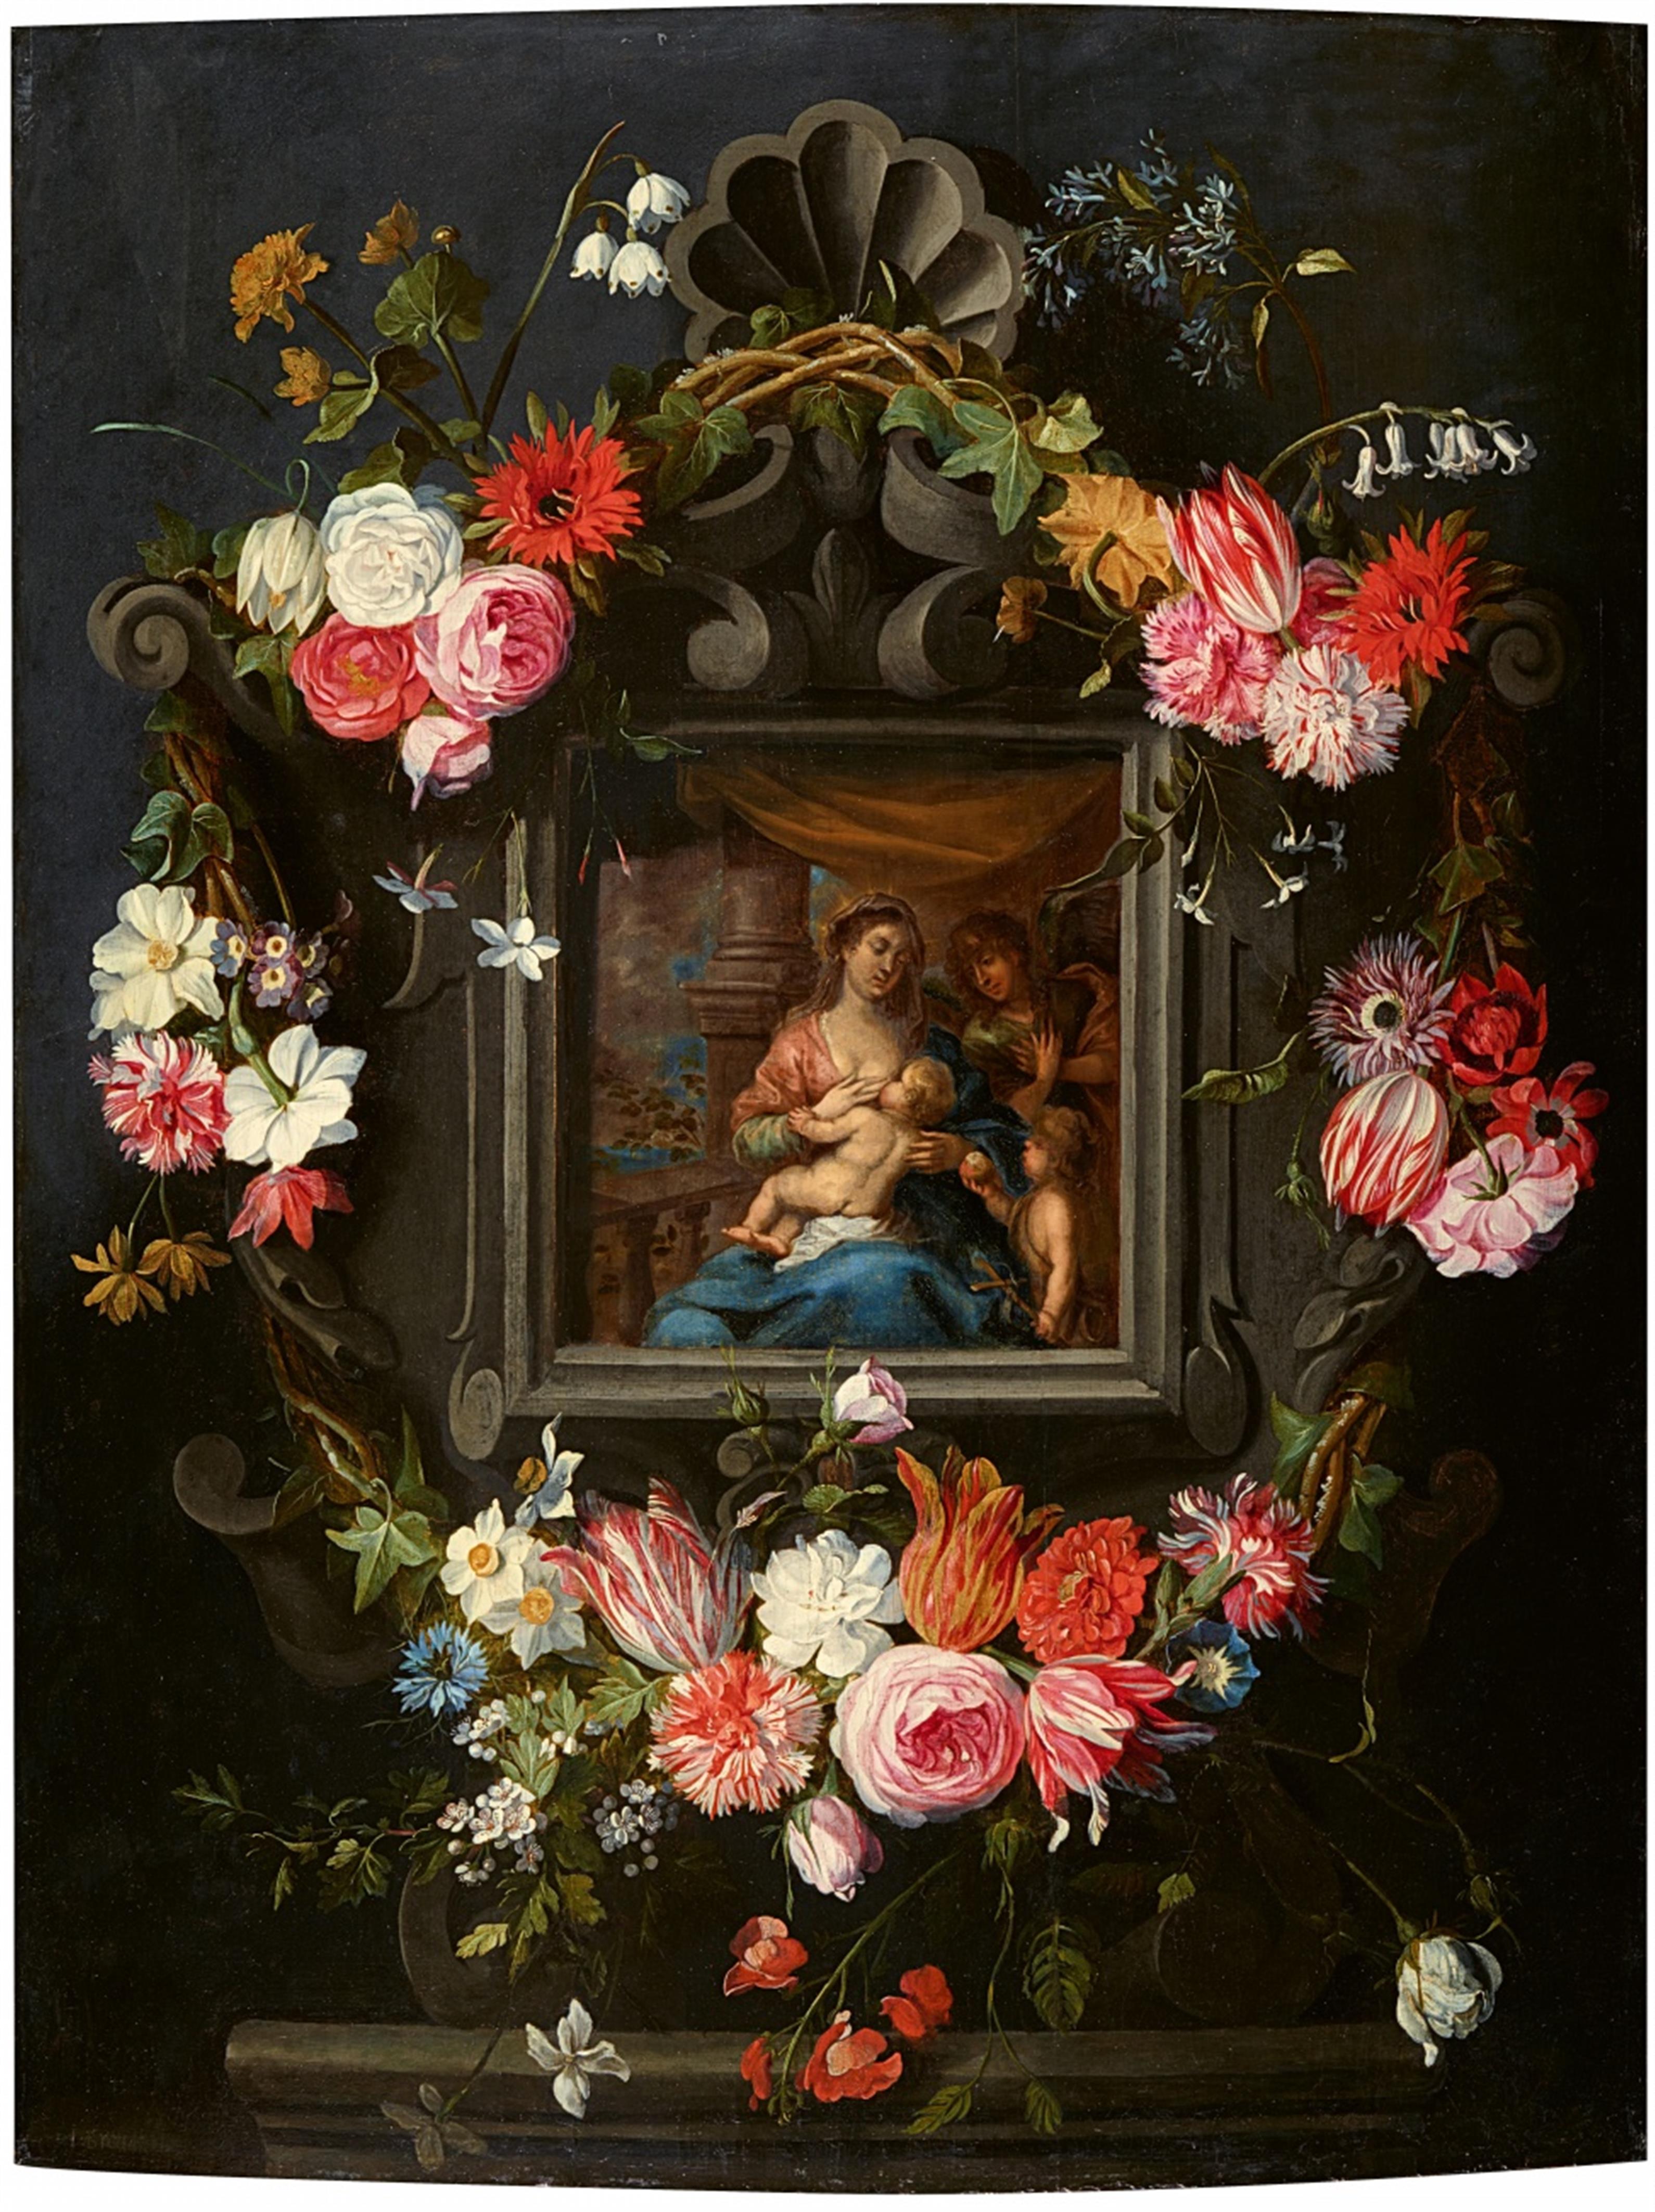 Jan Brueghel the Younger
Pieter van Avont - The Virgin and Child in a Cartouche with Flowers - image-1